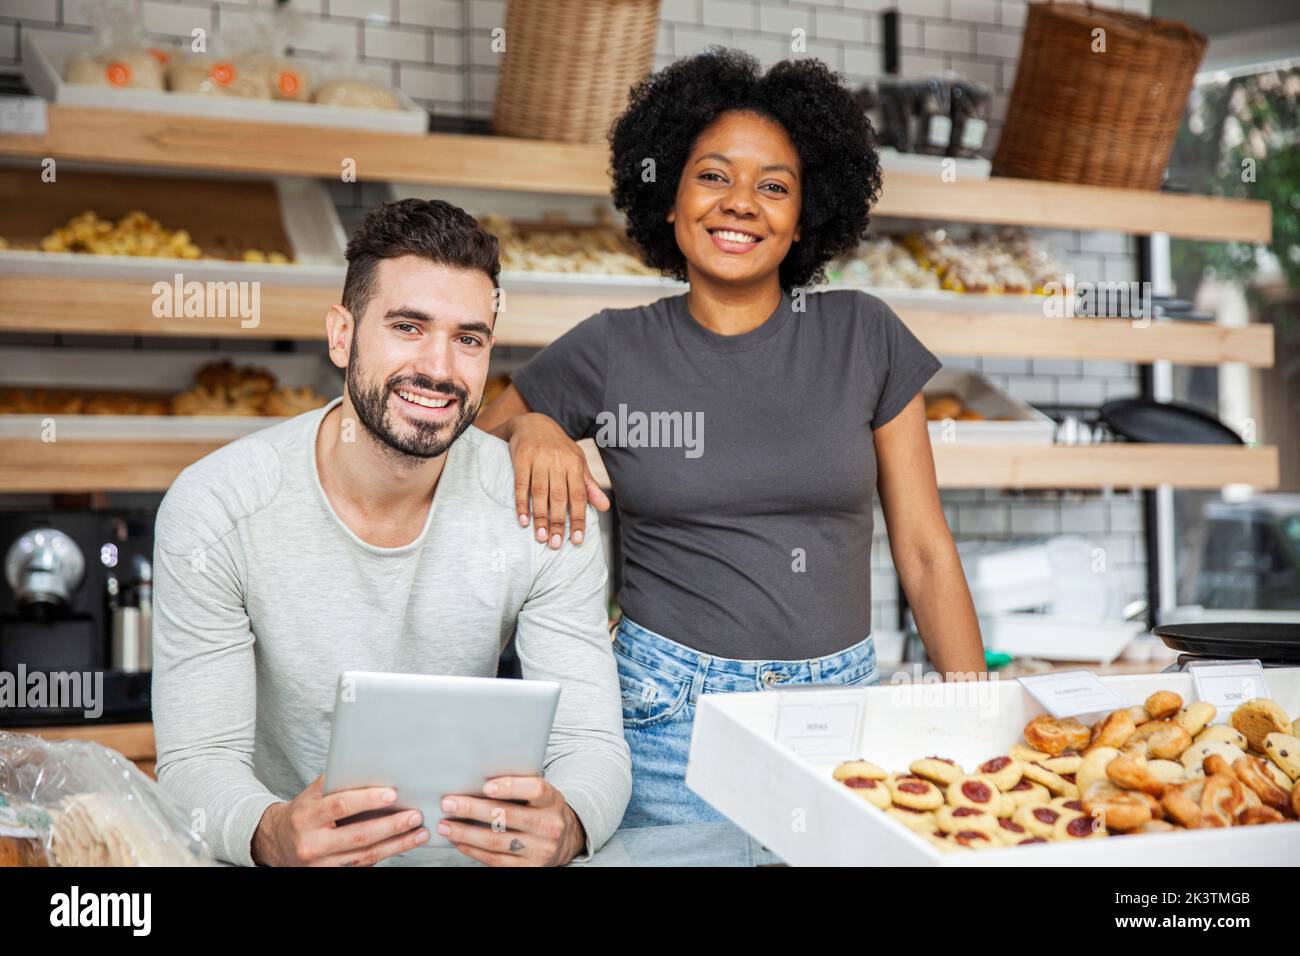 Bakery owners standing behind counter while holding digital tablet Stock Photo